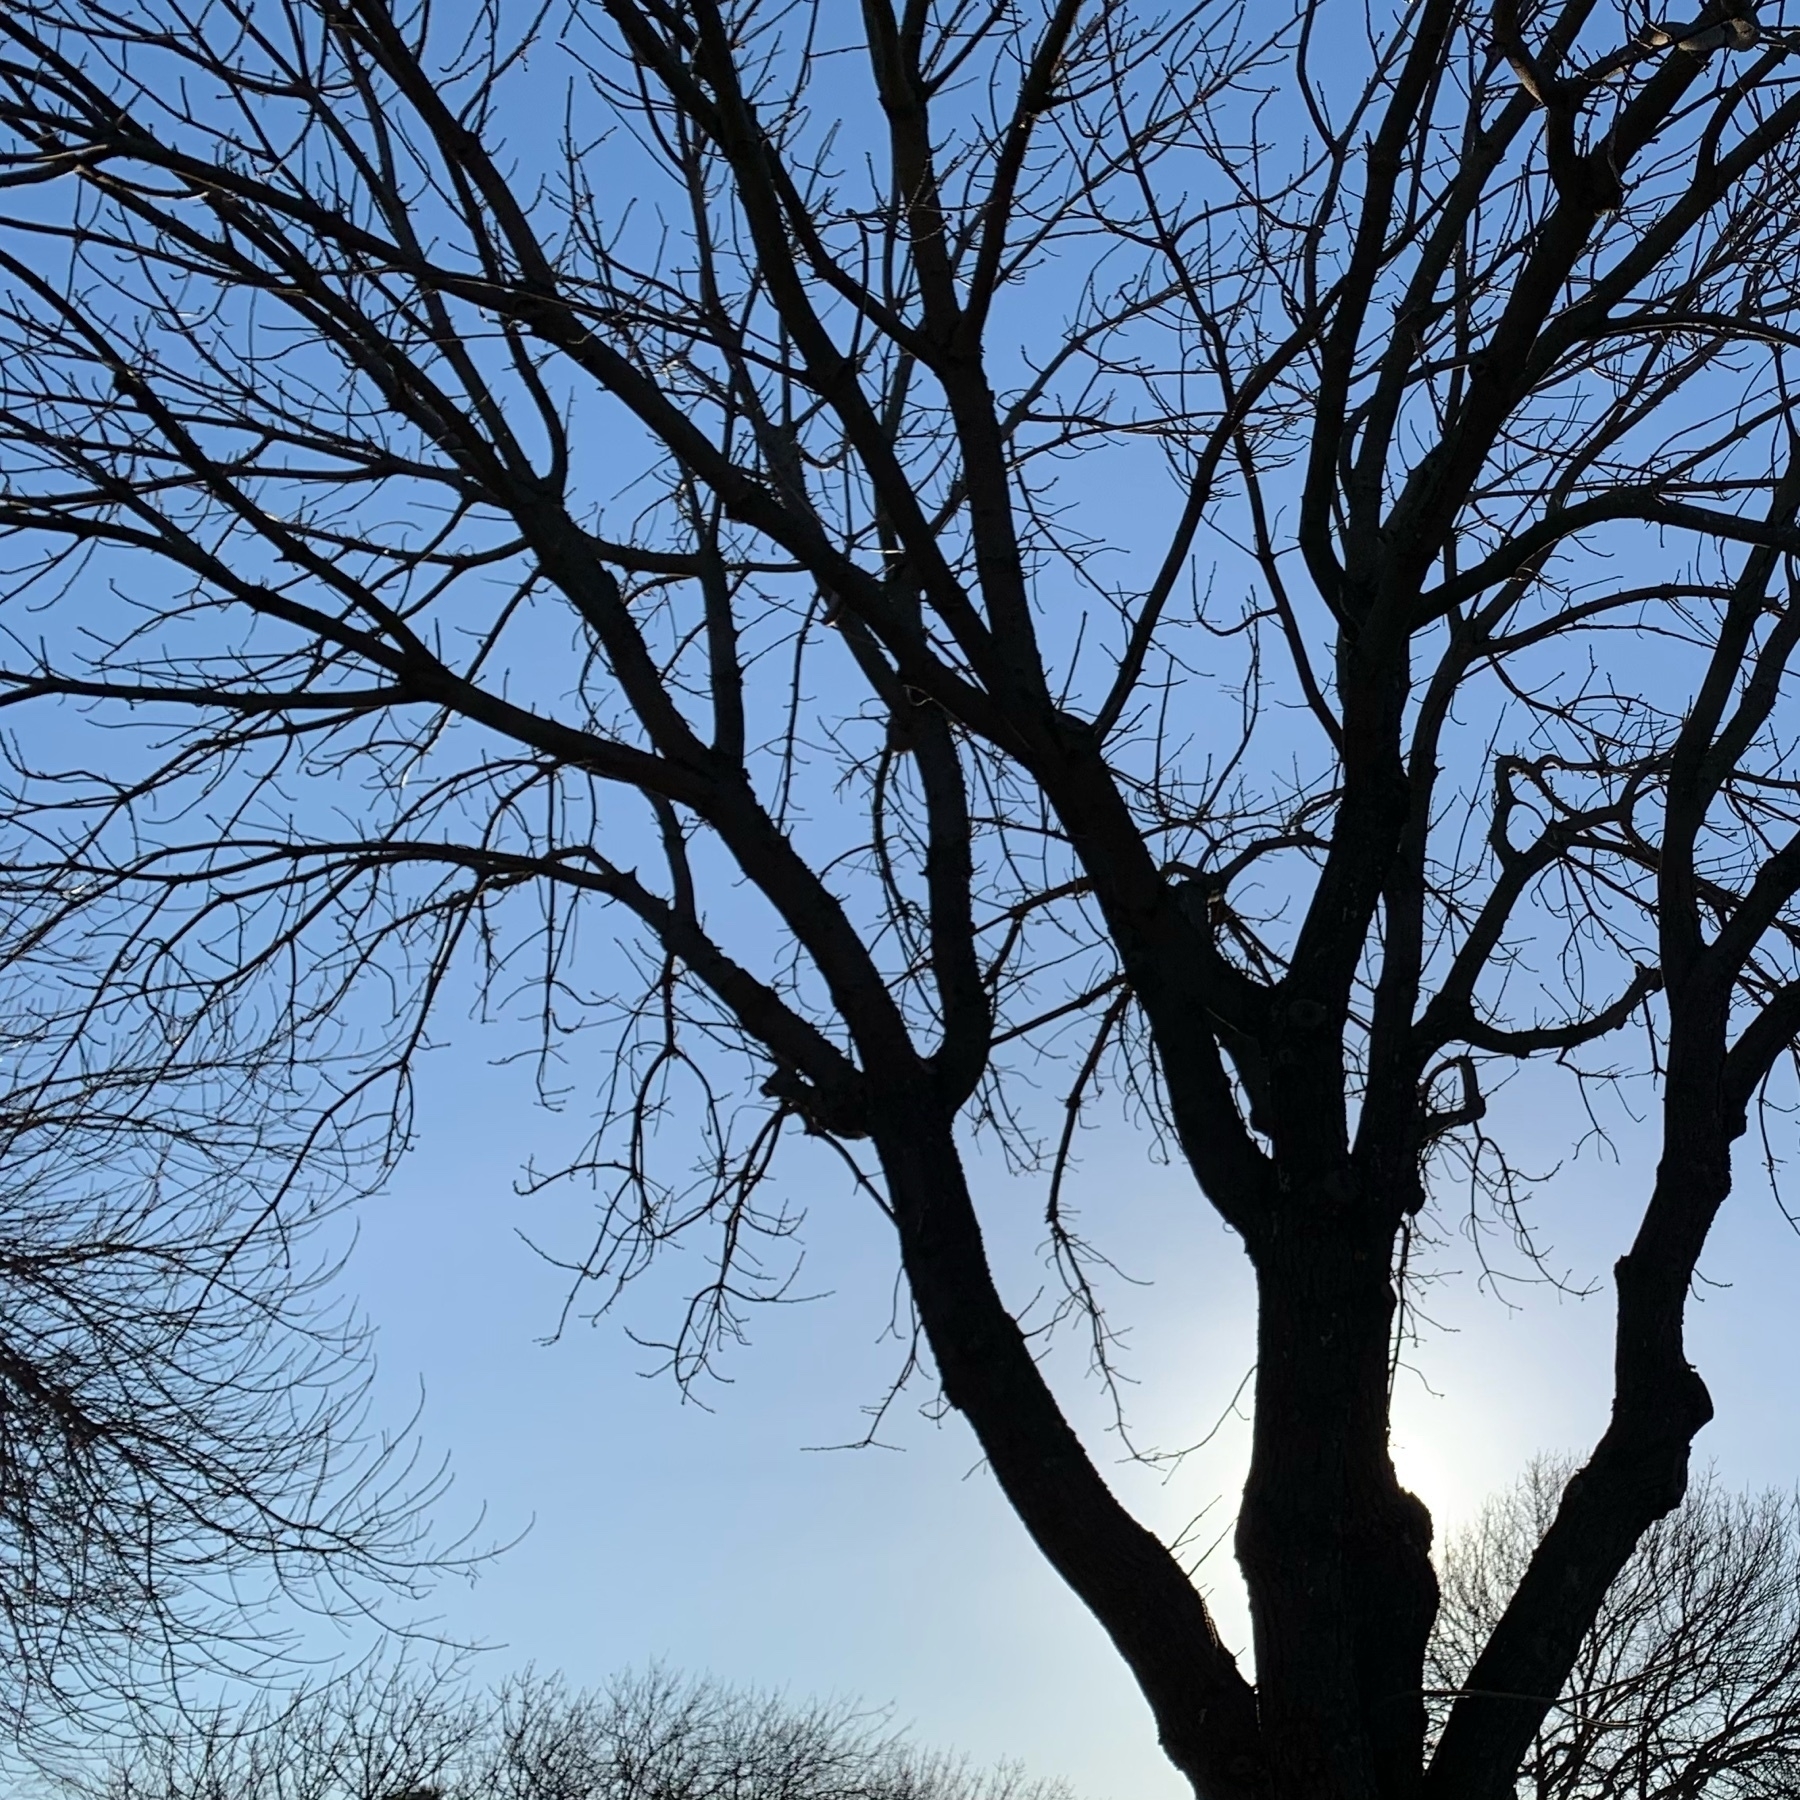 outline of a leafless tree backlit by the sun that has nothing to do with the comments in this post